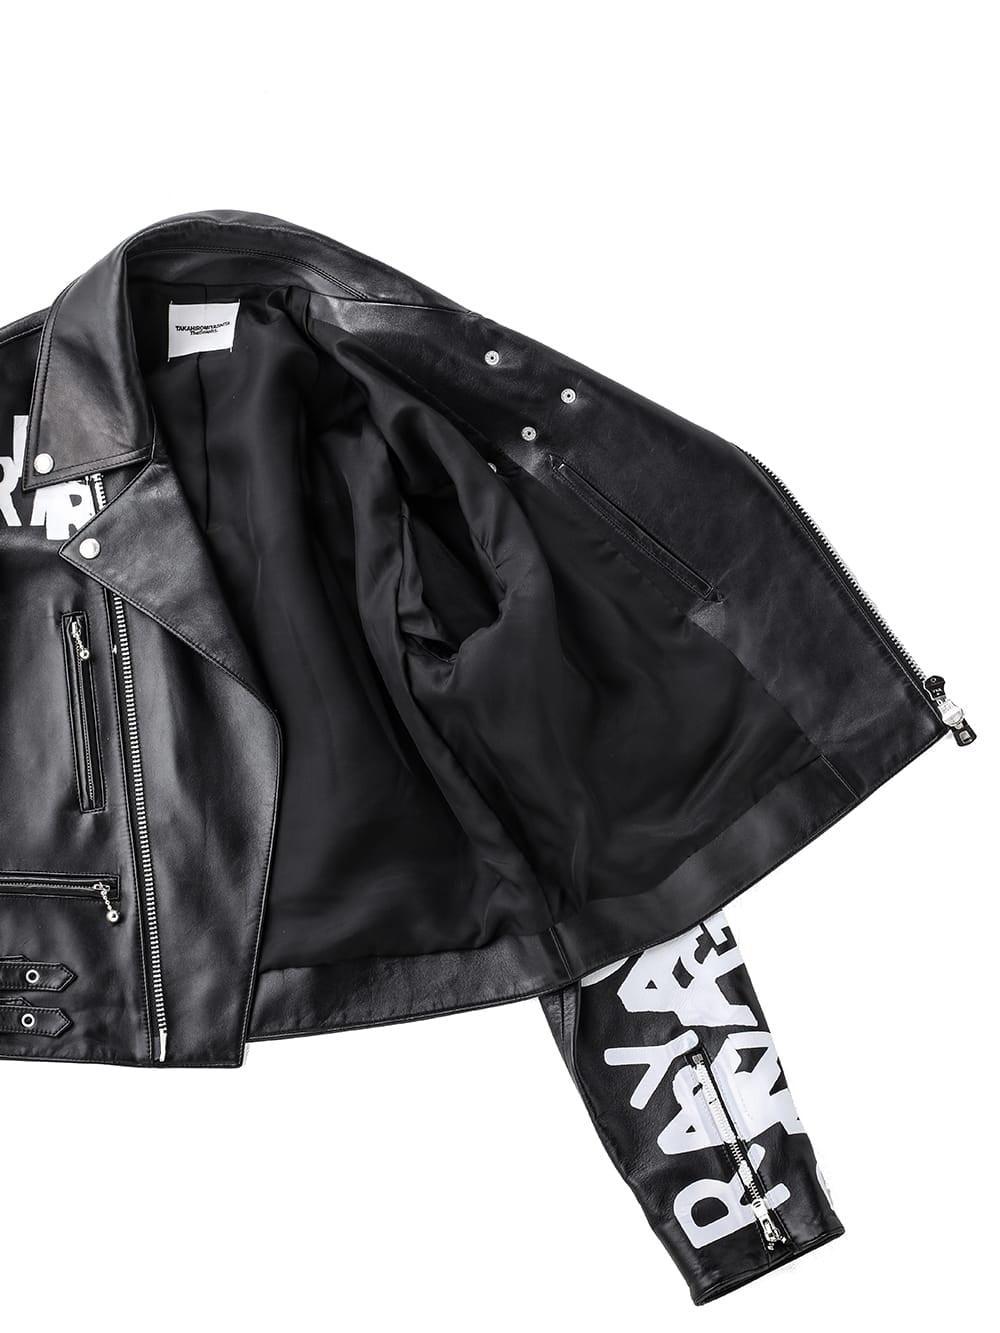 sj.0019aAW23-black two-way cropped riders jacket. THE TWO OF US 